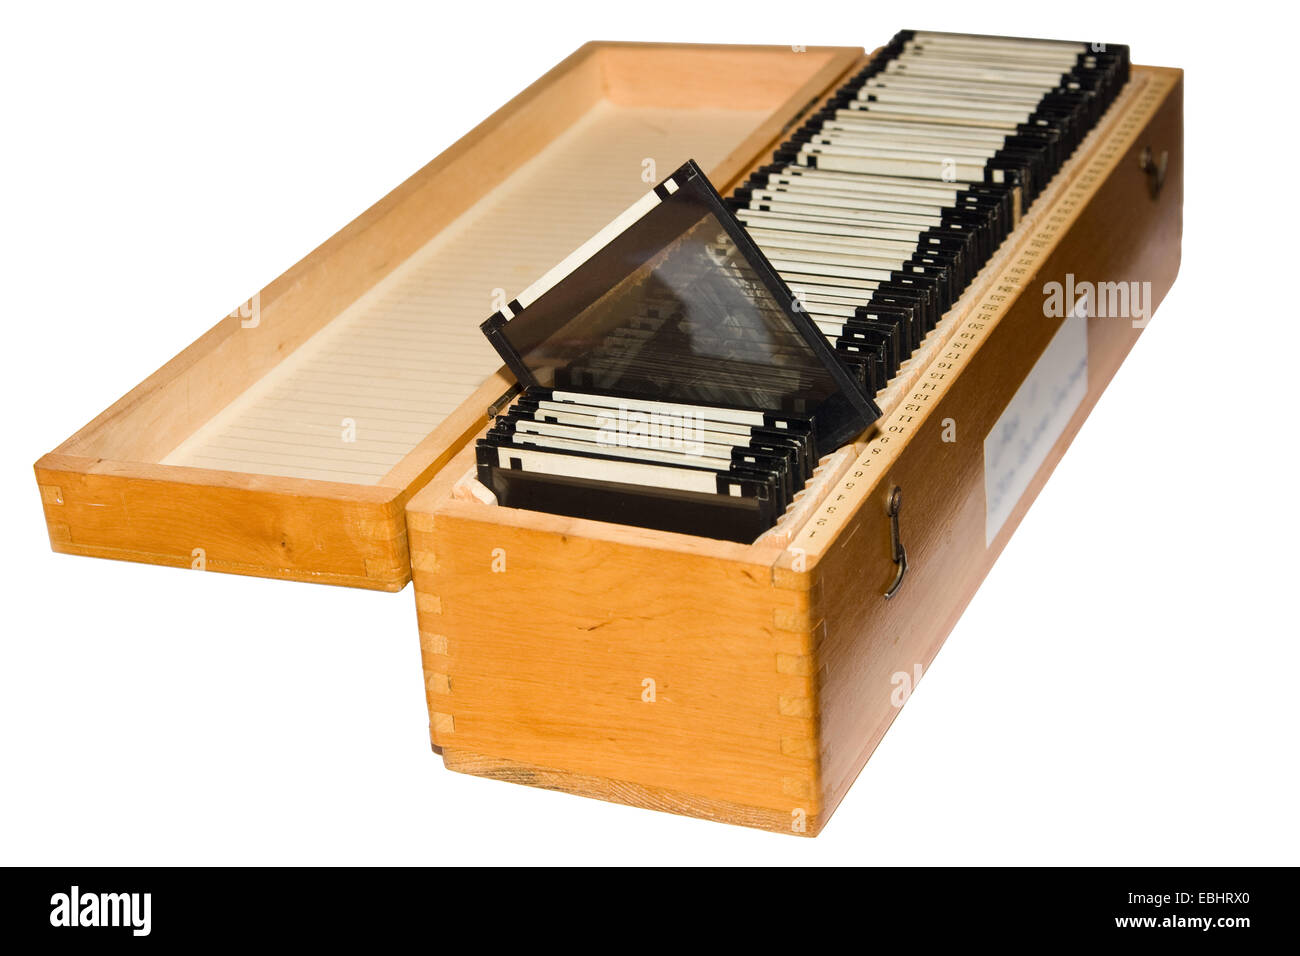 Photographic glass plates in a wooden box. Stock Photo